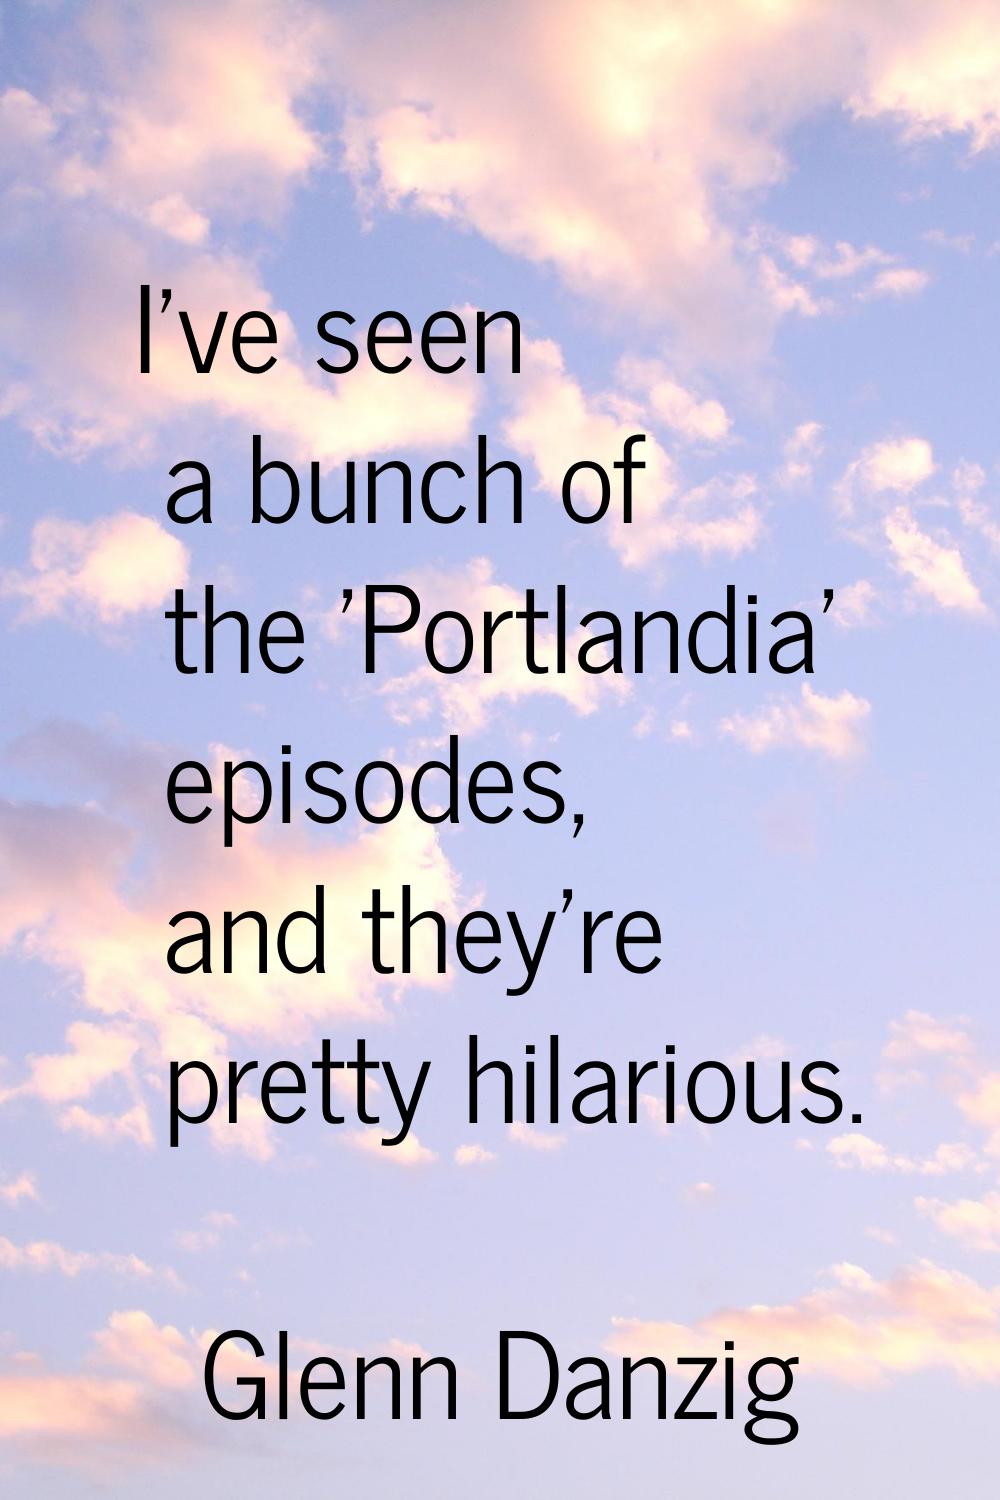 I've seen a bunch of the 'Portlandia' episodes, and they're pretty hilarious.